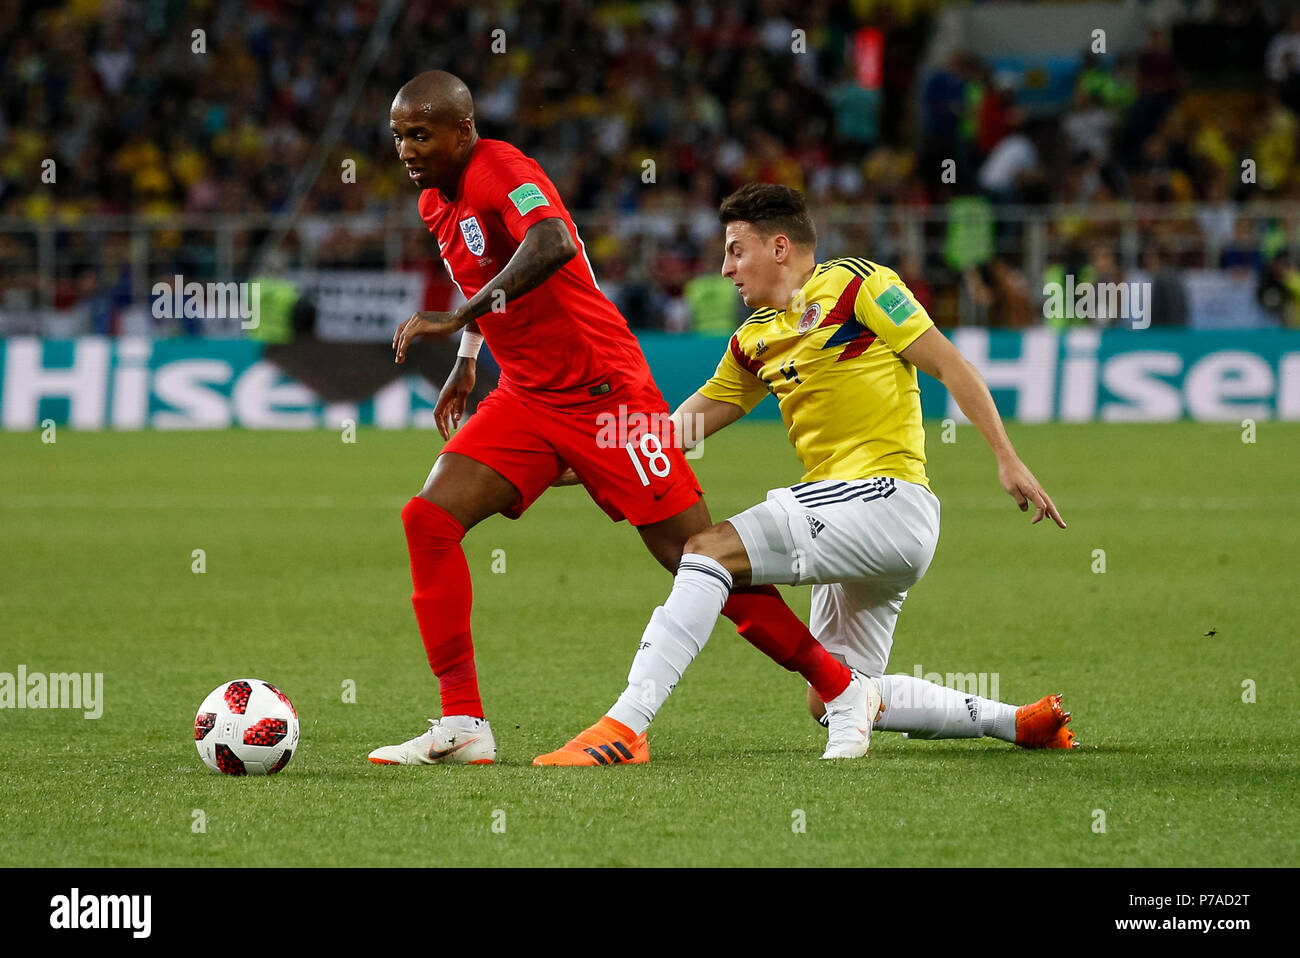 Moscow, Russia. 3rd July, 2018. Ashley Young of England and Santiago Arias of Colombia during the 2018 FIFA World Cup Round of 16 match between Colombia and England at Spartak Stadium on July 3rd 2018 in Moscow, Russia. (Photo by Daniel Chesterton/phcimages.com) Credit: PHC Images/Alamy Live News Stock Photo